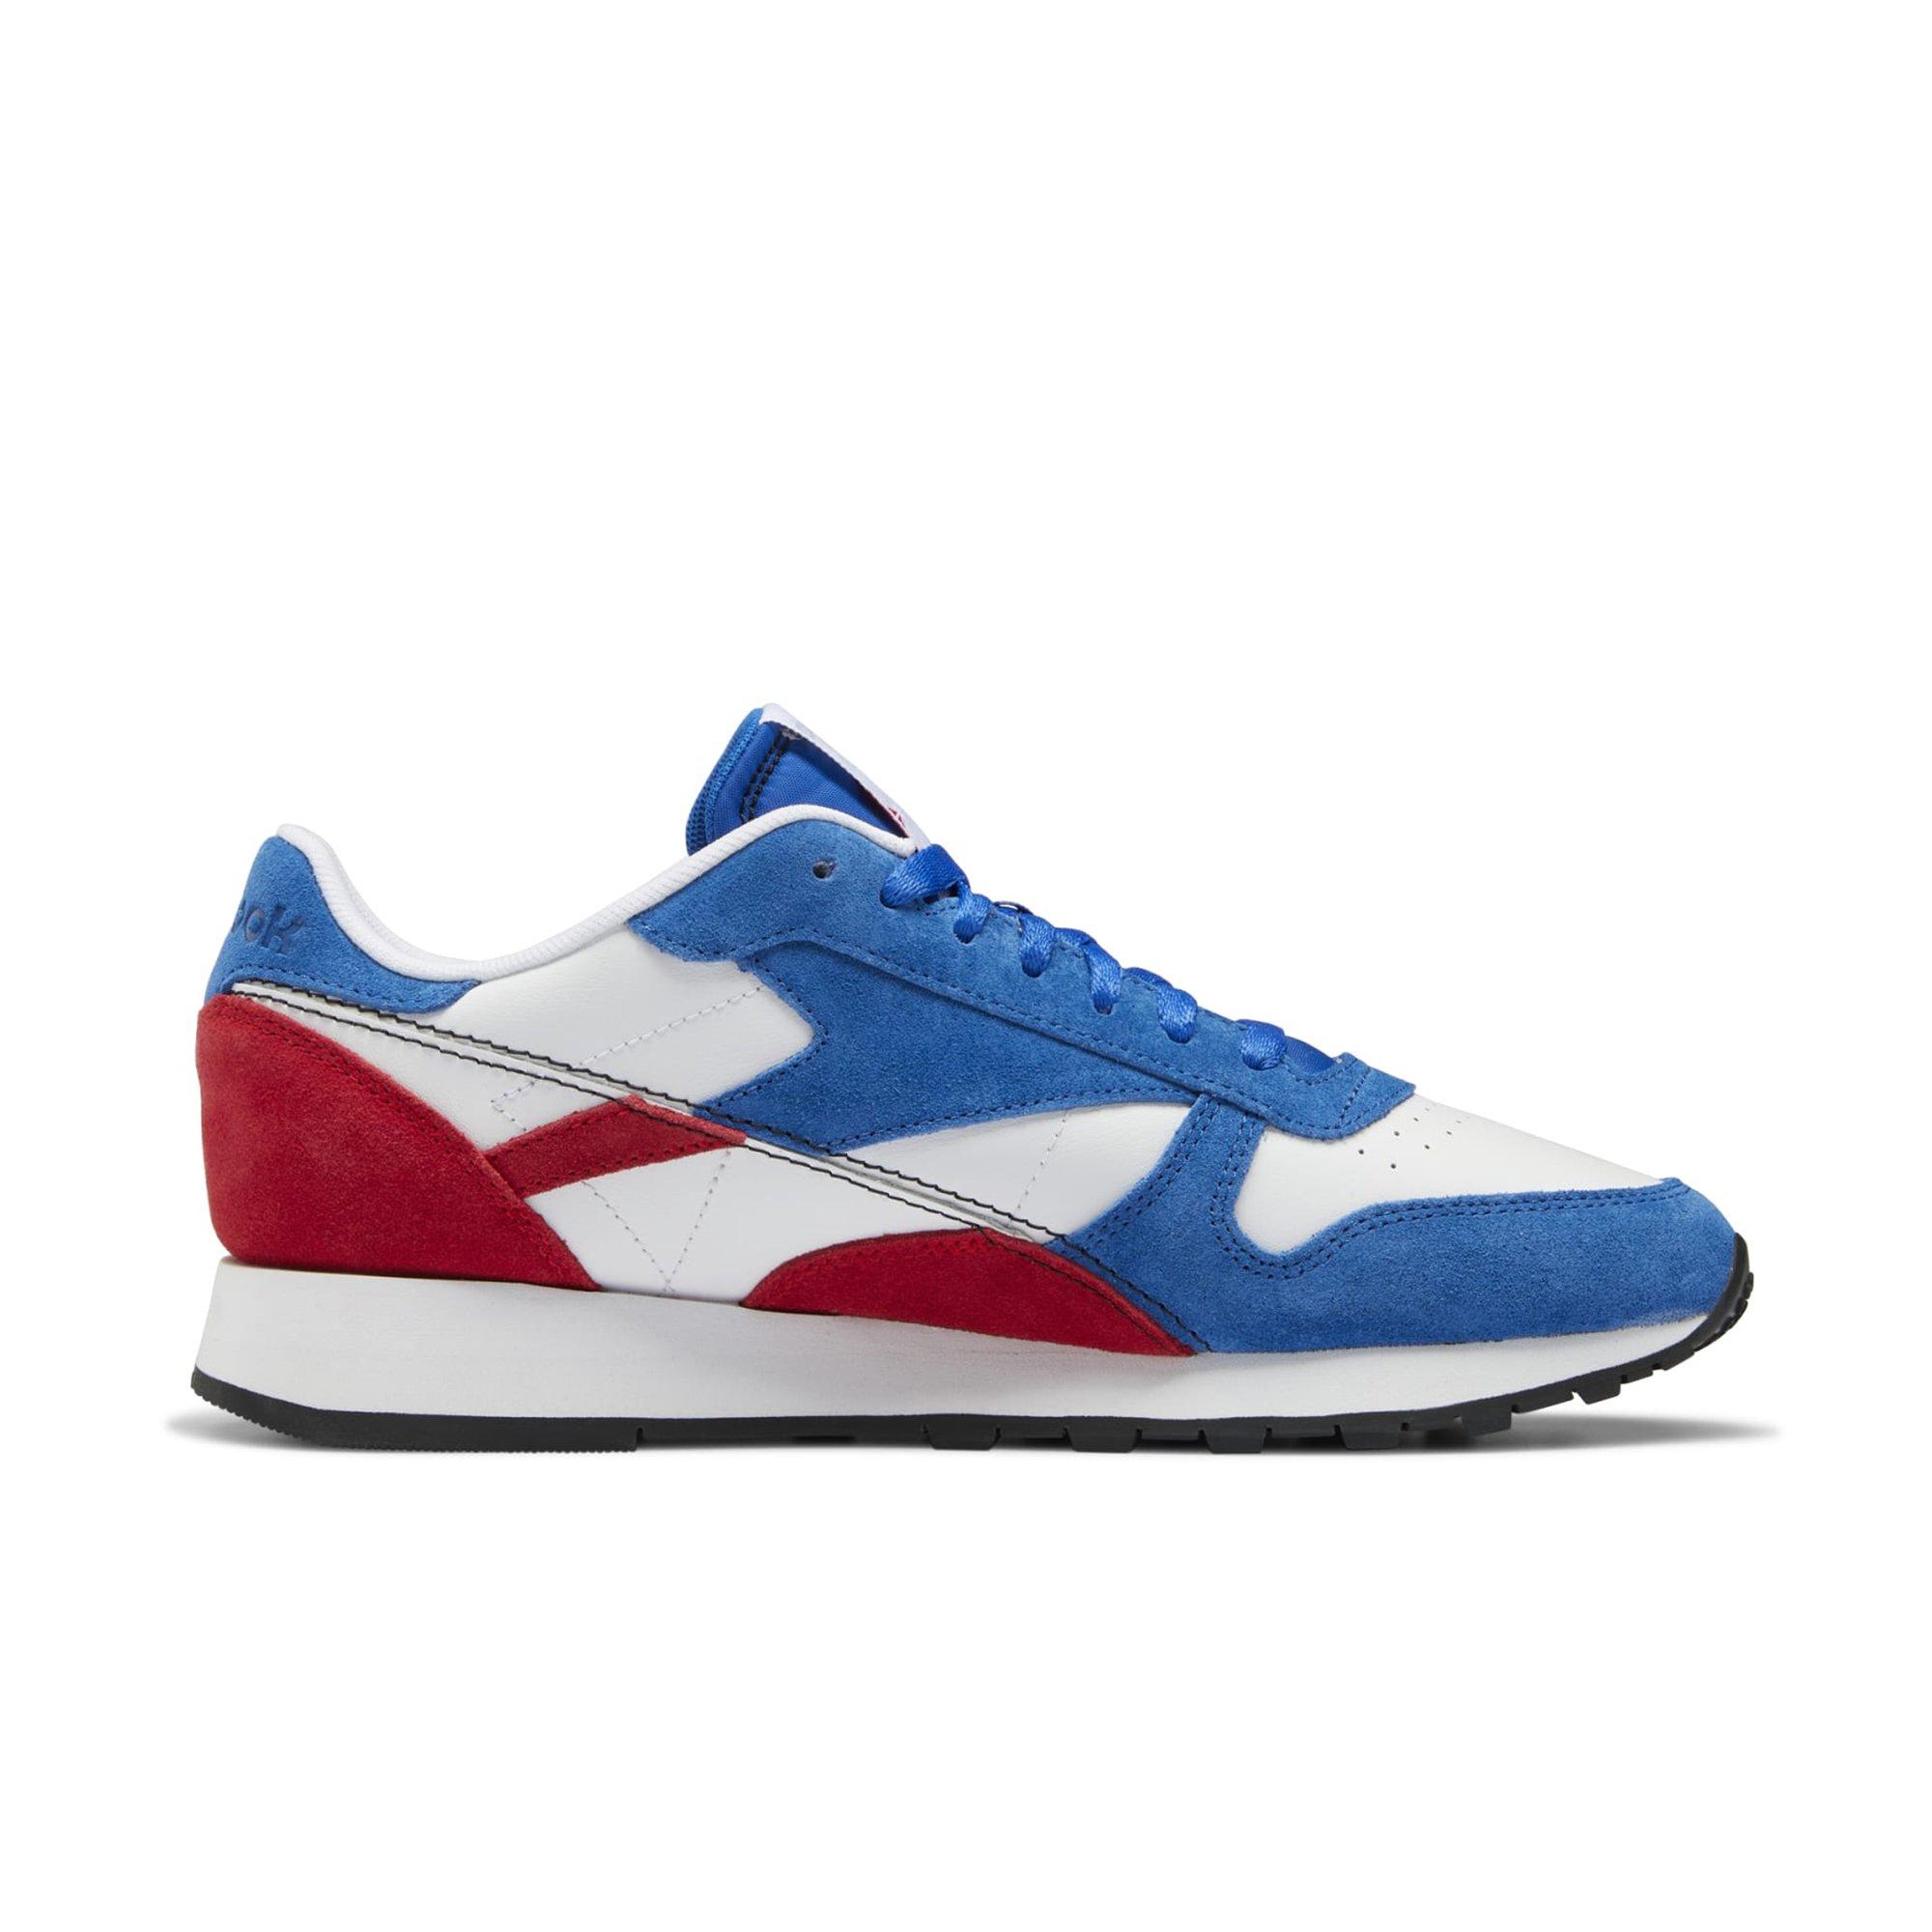 Reebok Royal Complete Sport Shoes in Cloud White / Vector Blue / Vector Red